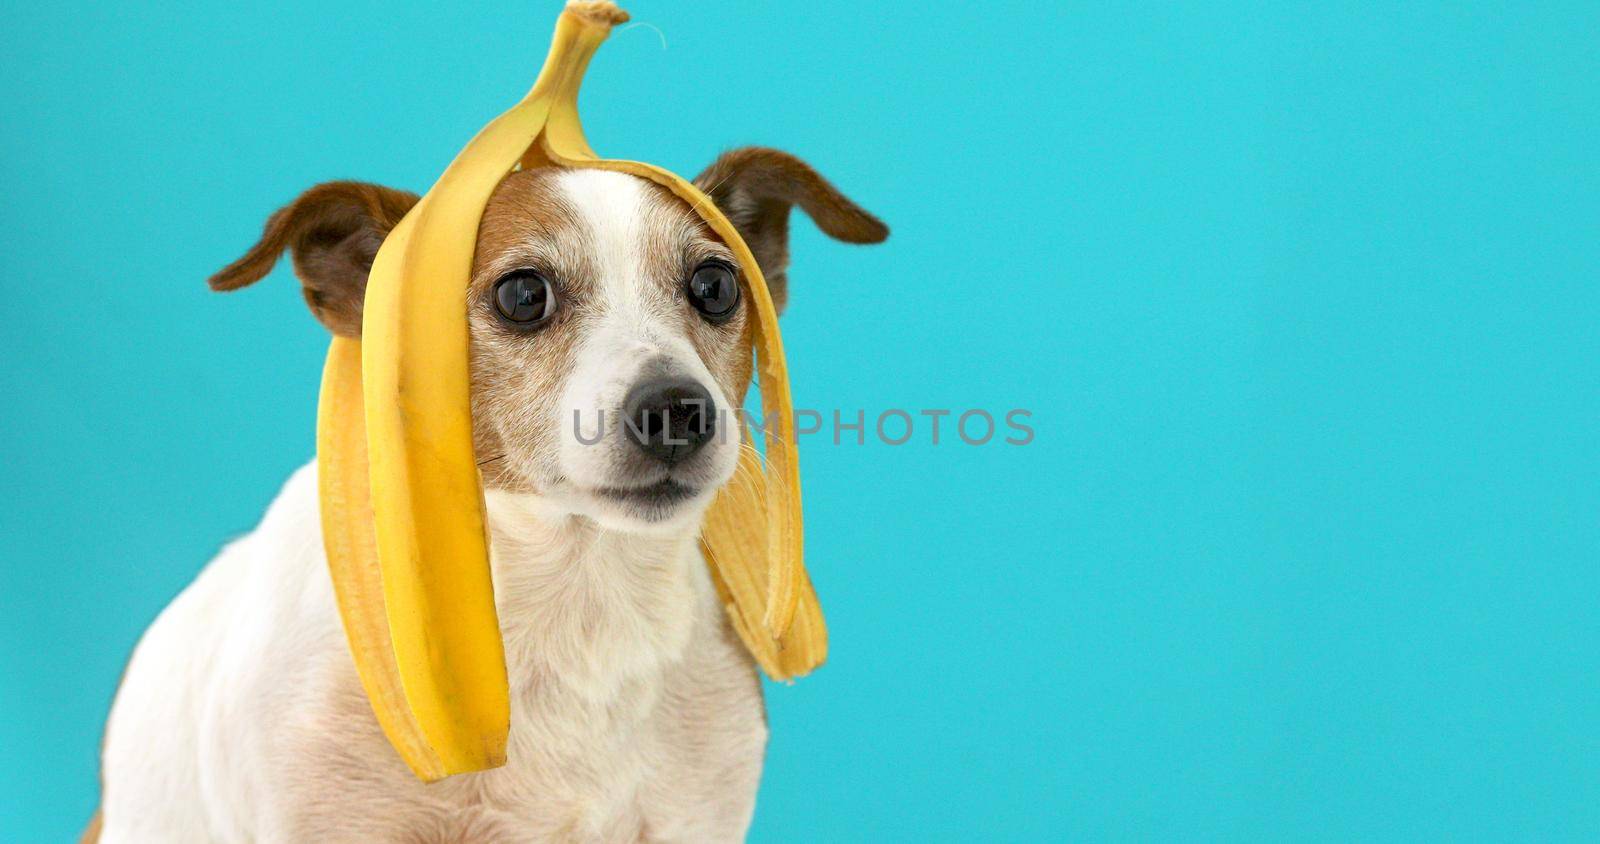 Funny dog with banana peel on his head portrait by Demkat